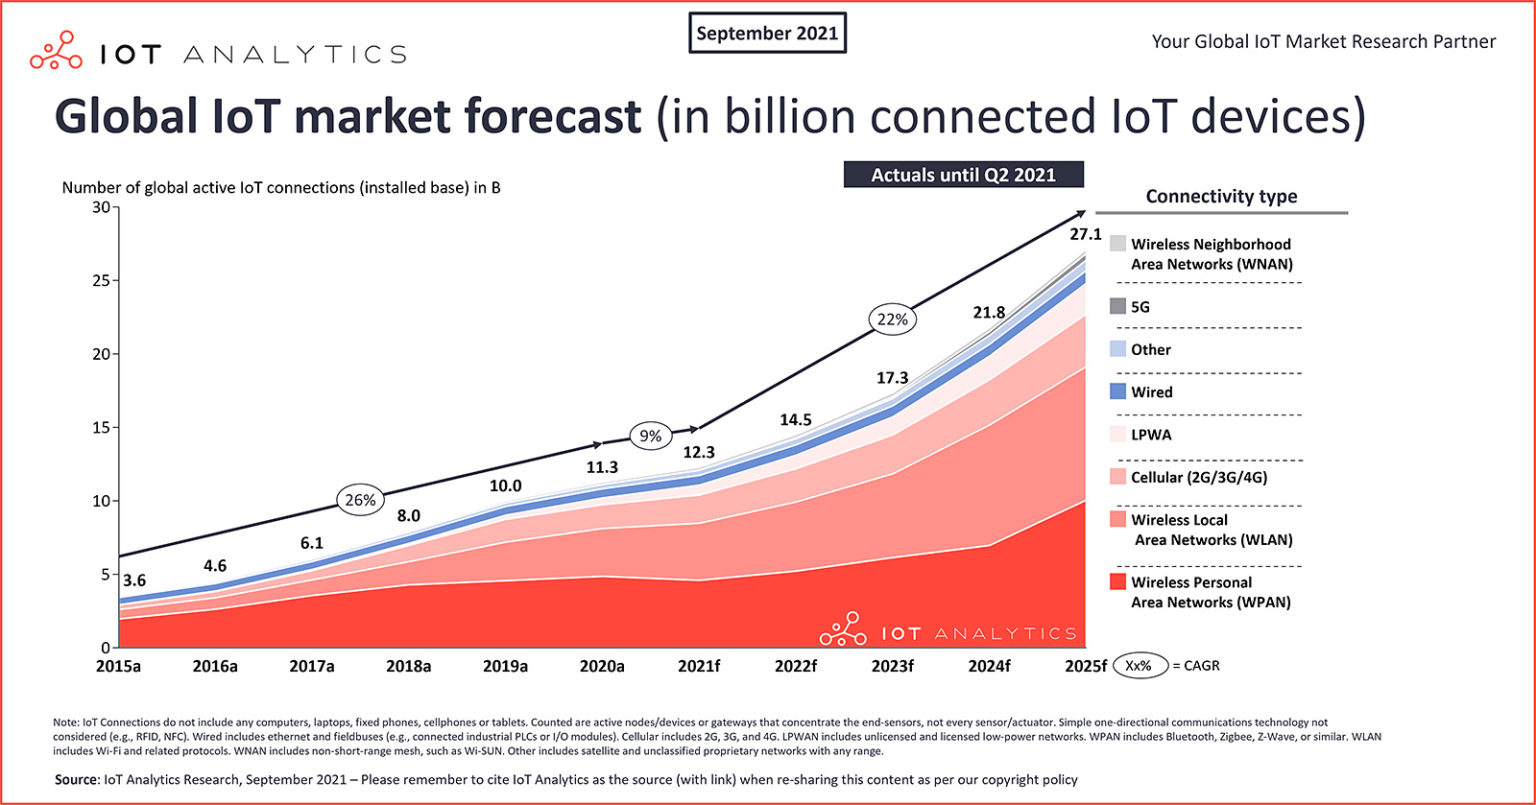 Global-IoT-market-forecast-in-billion-connected-iot-devices-min-1536x805.jpg (169 KB)